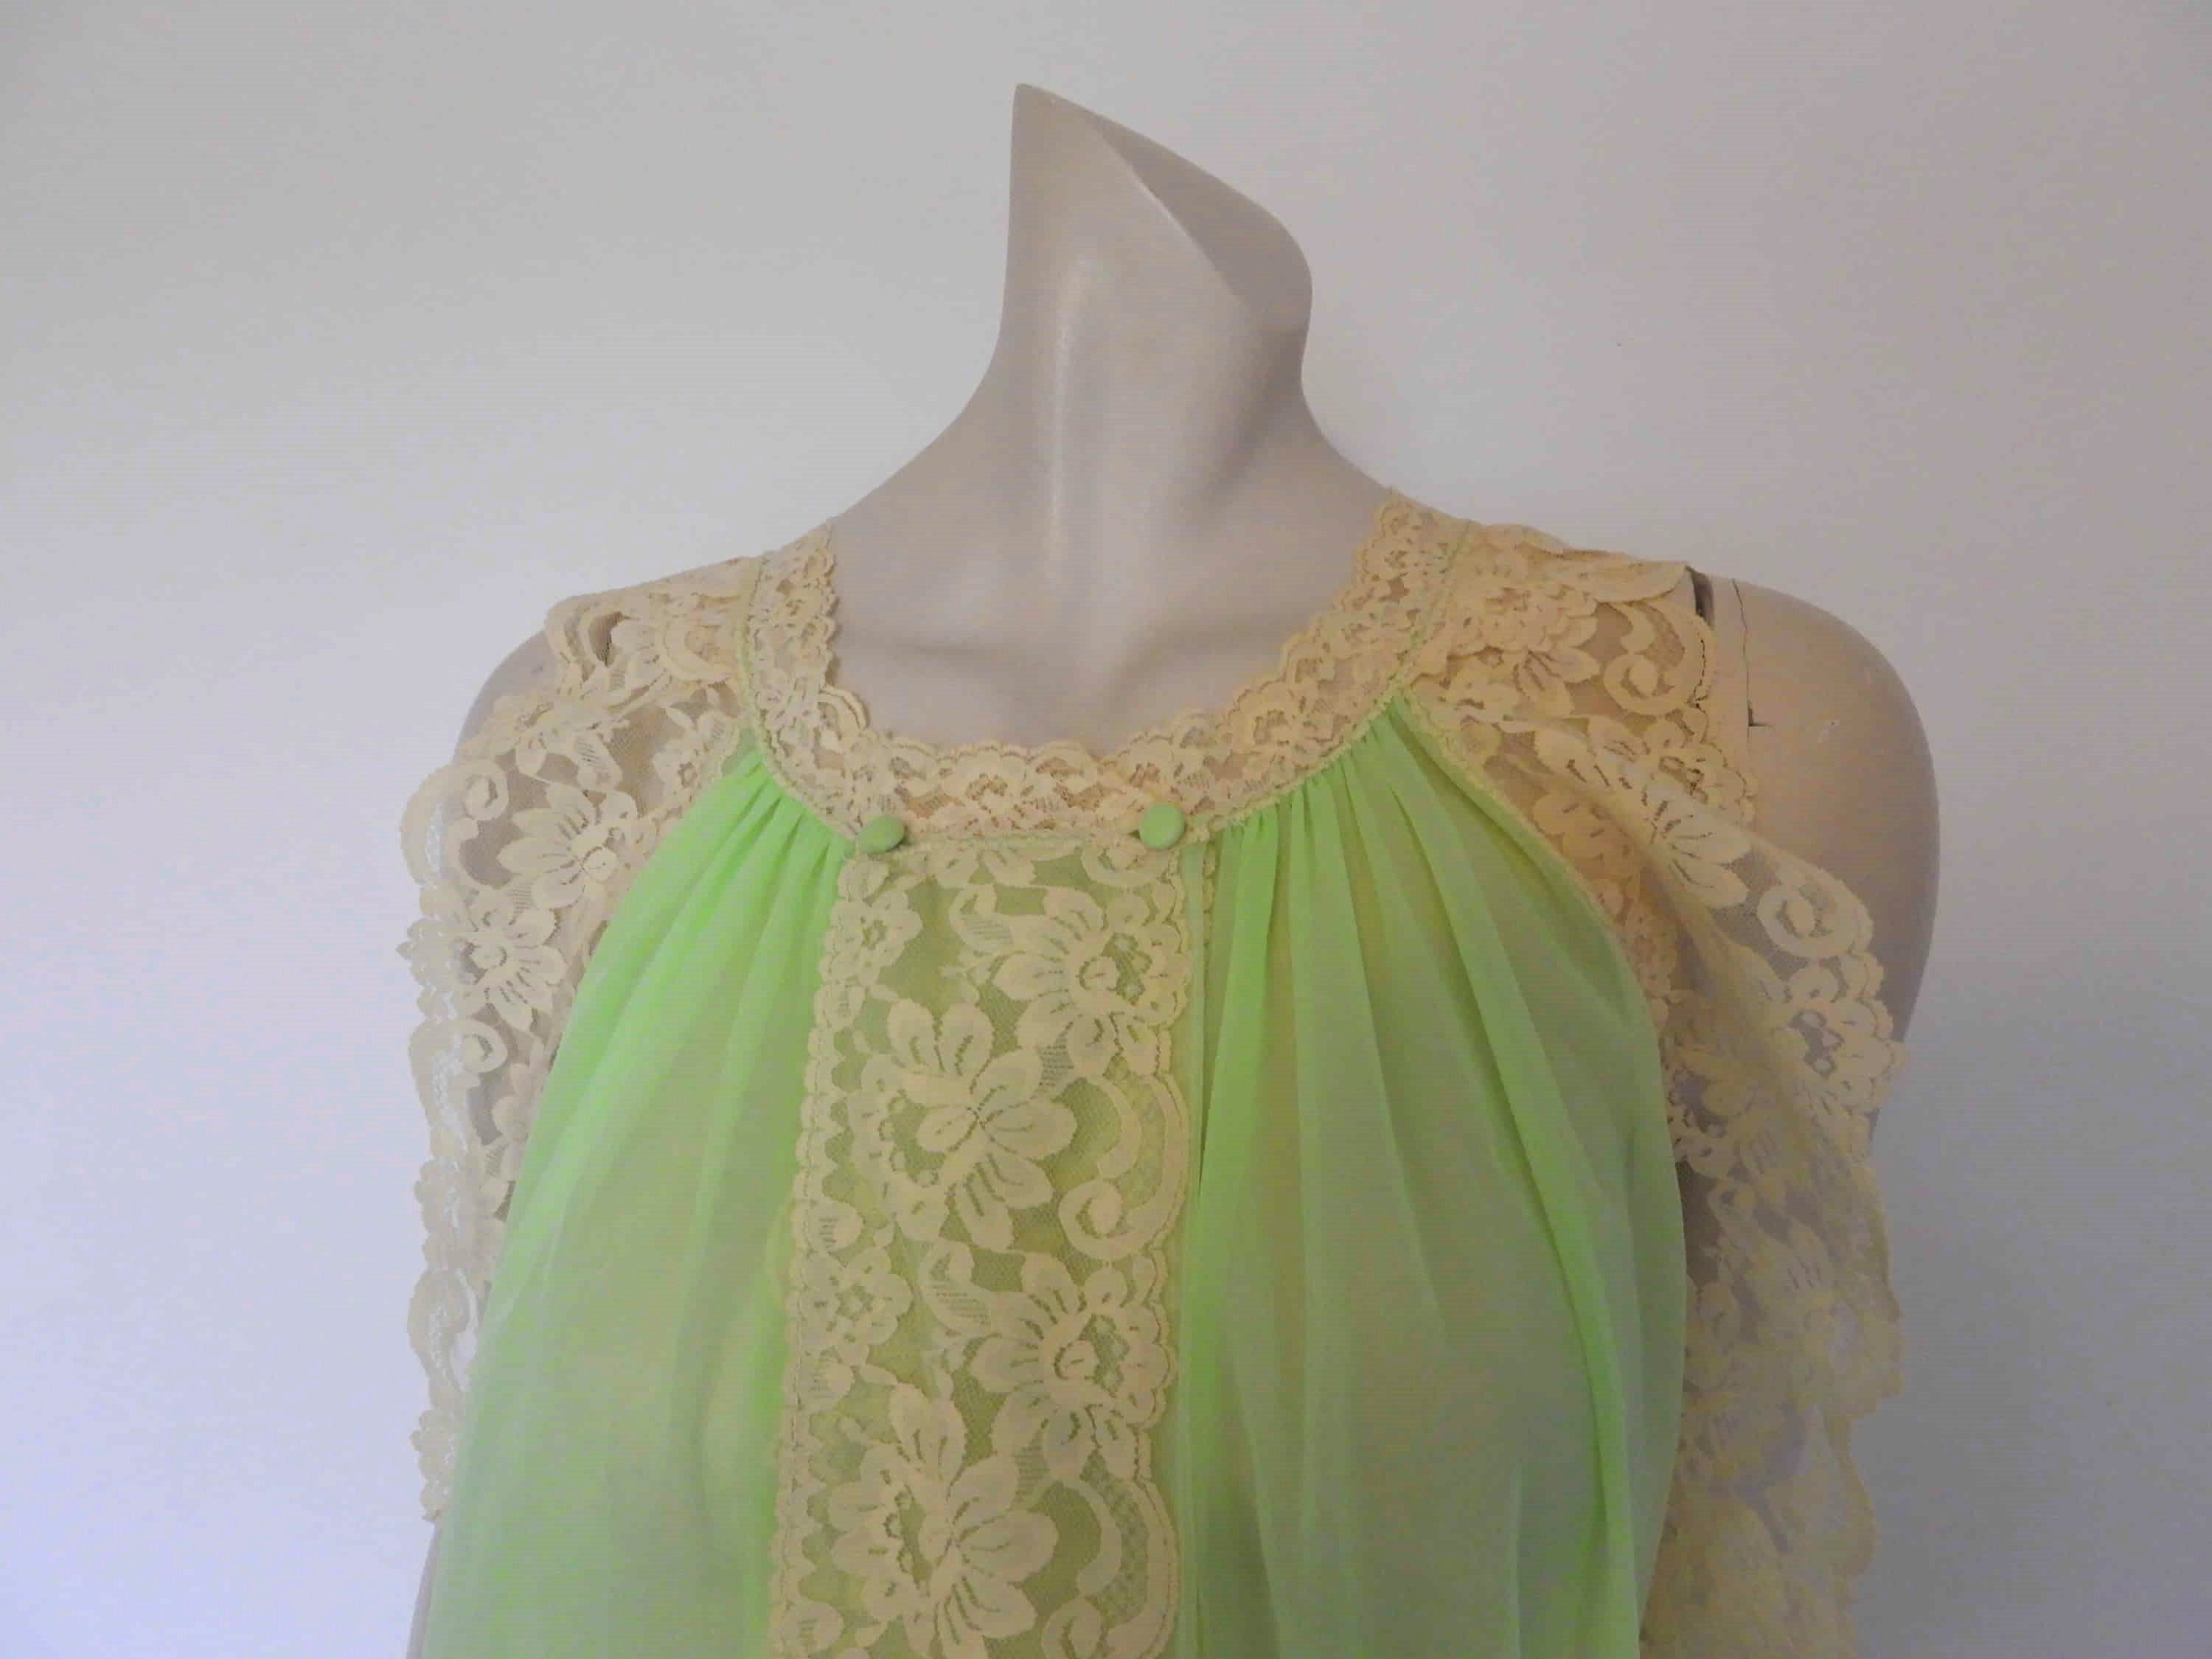 vintage sheer green lingerie negligee peignoir robe by tosca